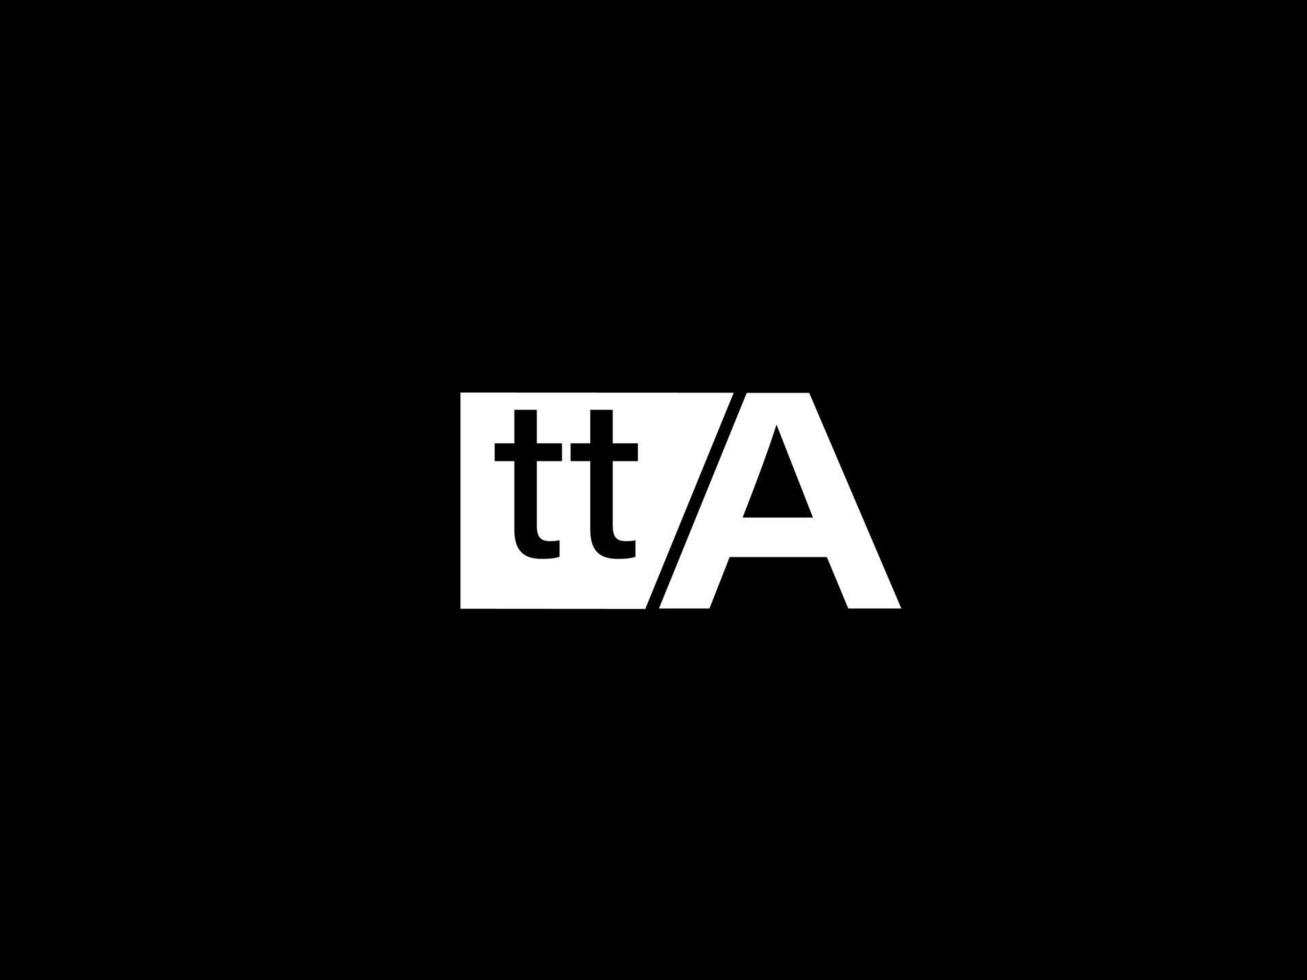 TTA Logo and Graphics design vector art, Icons isolated on black background